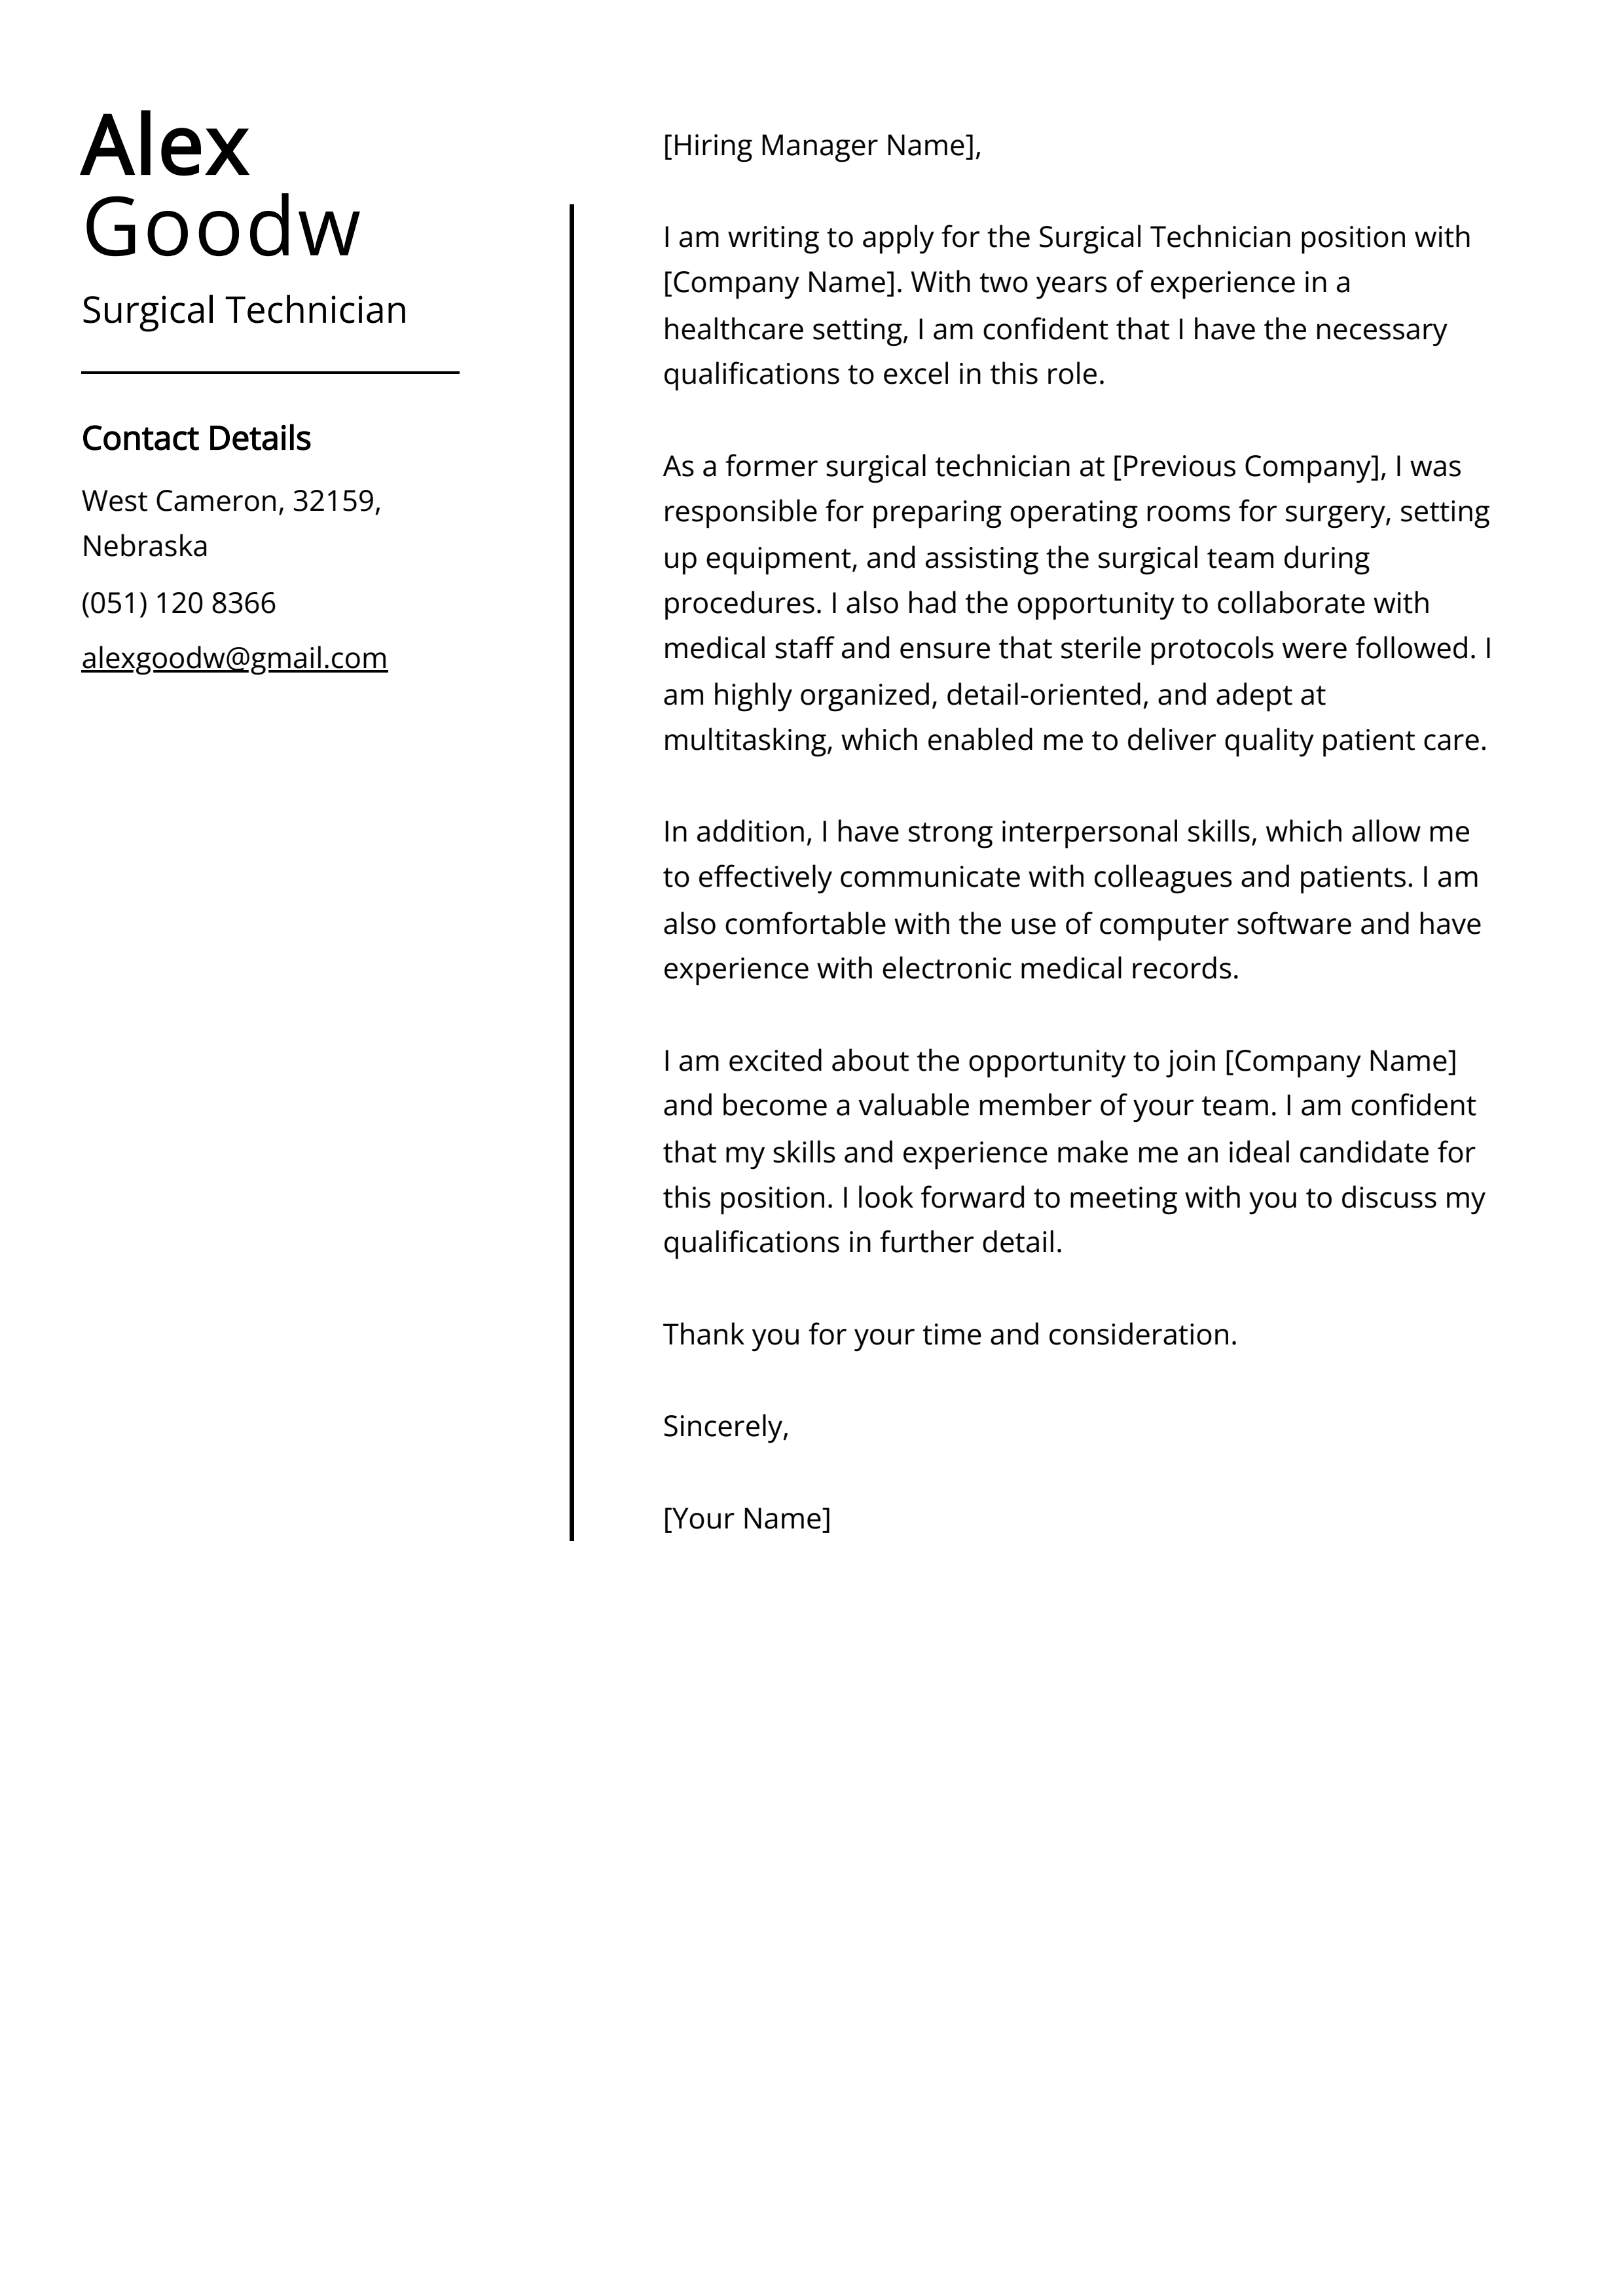 Surgical Technician Cover Letter Example